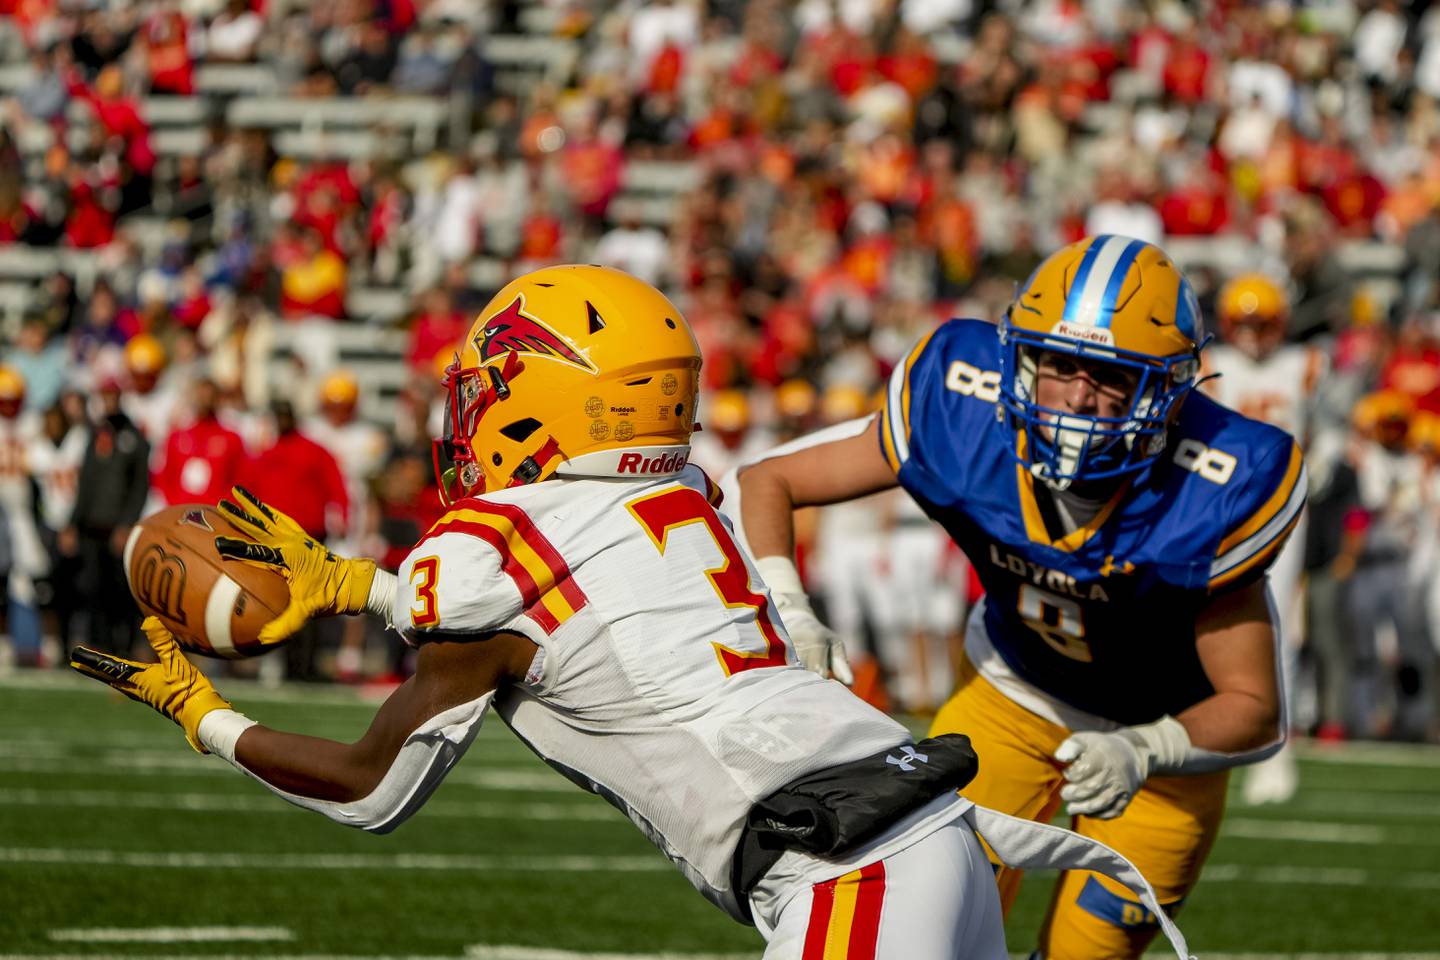 Calvert HallÕs Oliver Redd makes a touchdown catch during the 102nd edition of the Thanksgiving Day matchup between the Calvert Hall Cardinals and the Loyola Dons at Johnny Unitas Stadium in Towson, Maryland on November 24, 2022. photo by Scott Serio for The Baltimore Banner